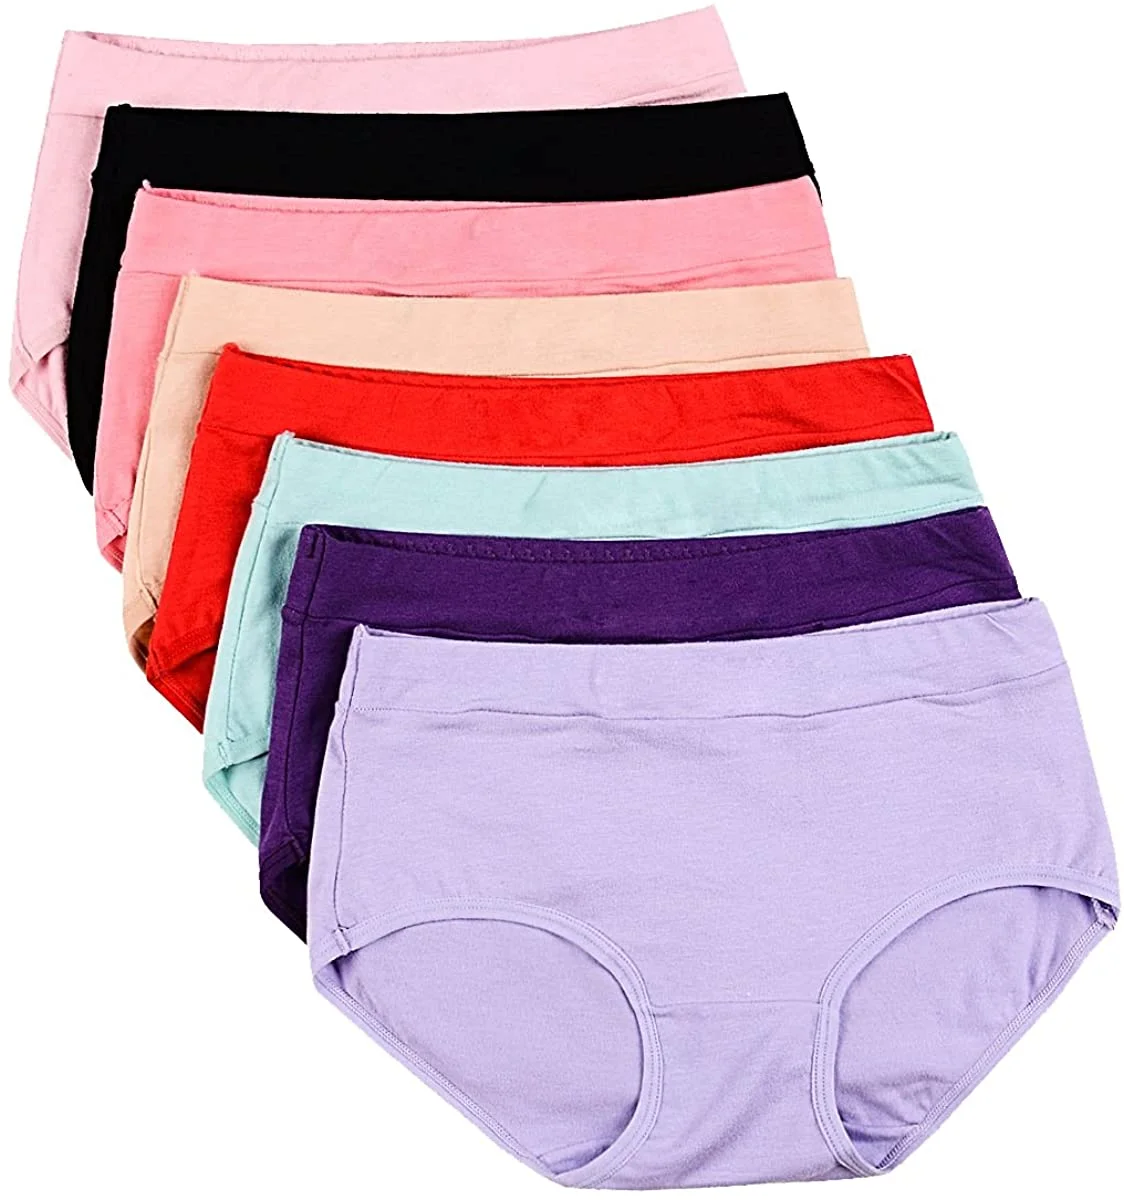 Wholesale Women’s Mid Rise Stretch Cotton Panties Manufacturer Supplier In Bangladesh Factory